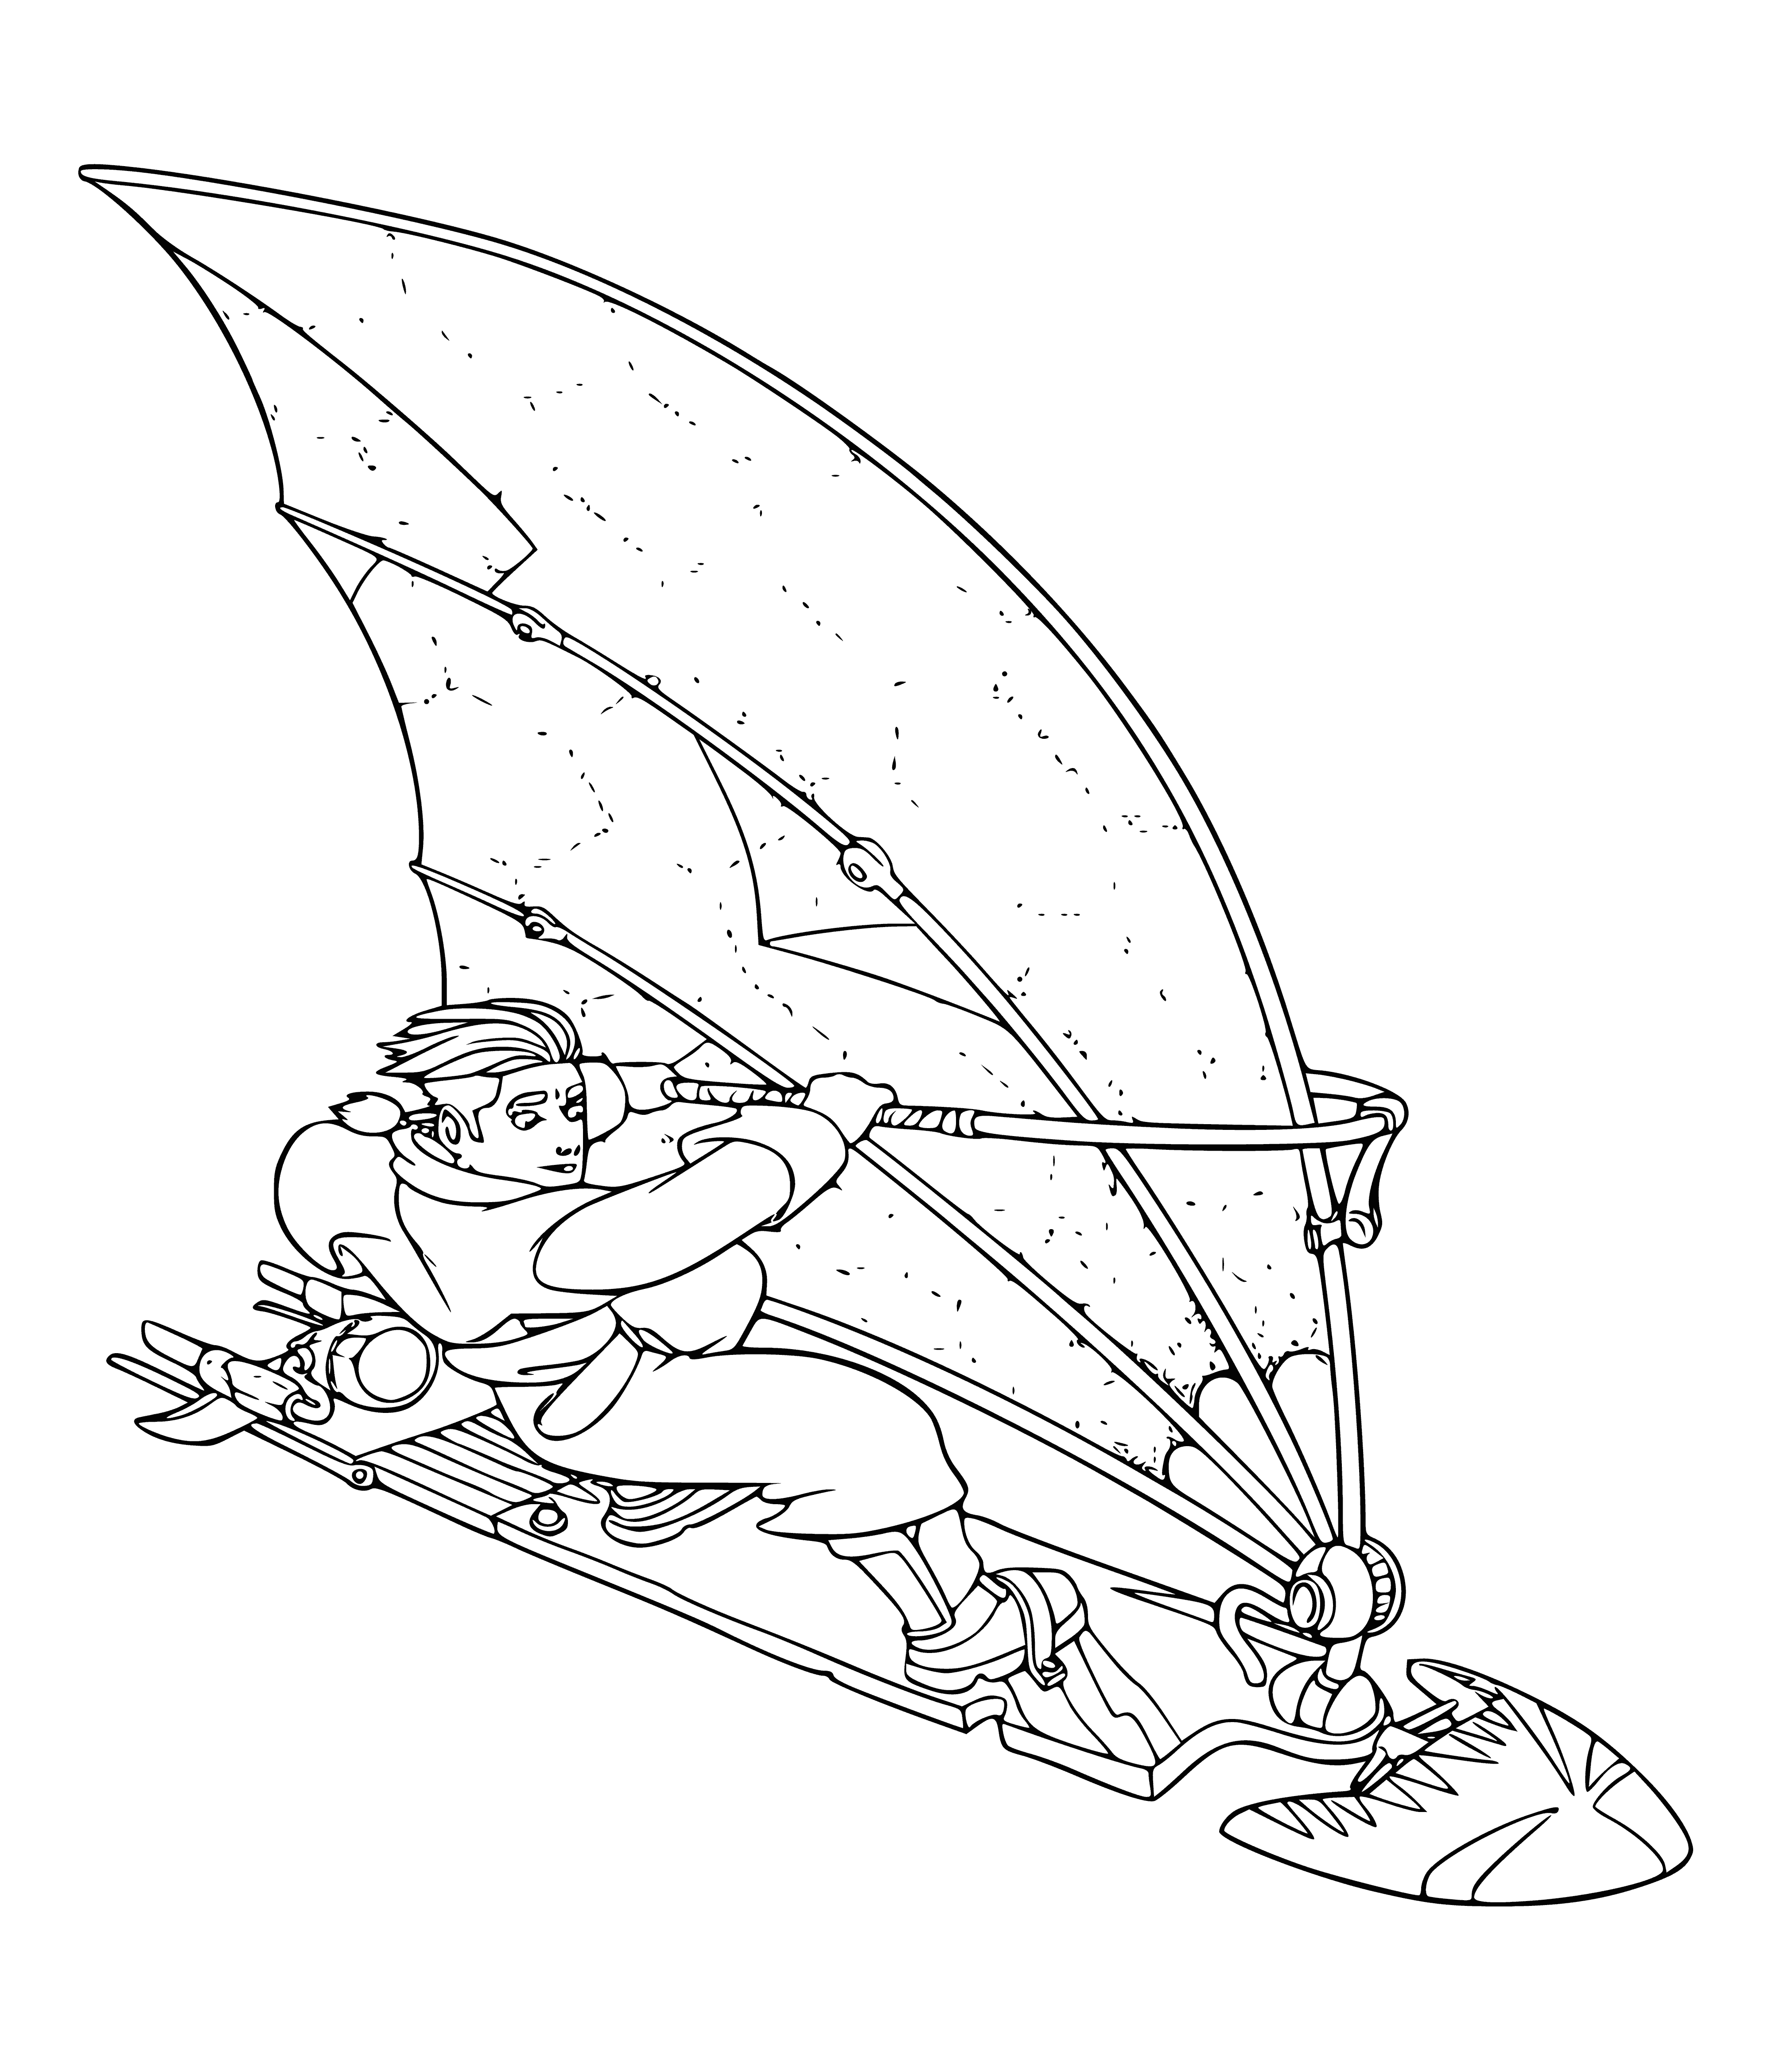 Board with sail coloring page